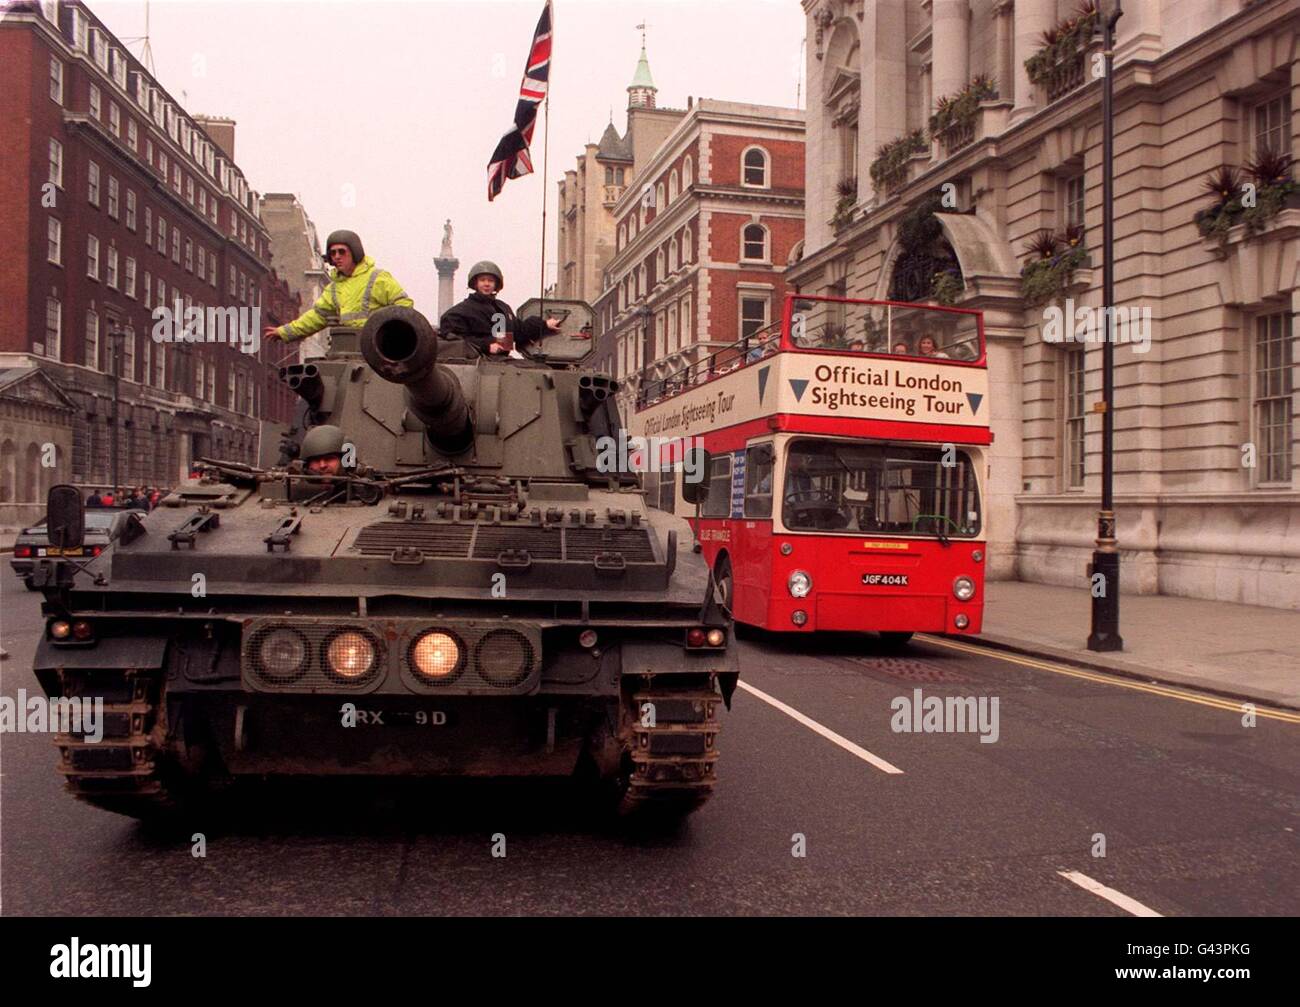 Fourteen-year-old Leo Lester, in turret on right, drives a World War II tank along Whitehall today (Sunday) on his way to Downing Street to deliver a copy of the new 'Images of War' CD-ROM to Number 10. The highly evocative and comprehensive CD-ROM covers 35 major battles of World War II and includes eyewitness accounts of the horrors and casualties of war. Stock Photo